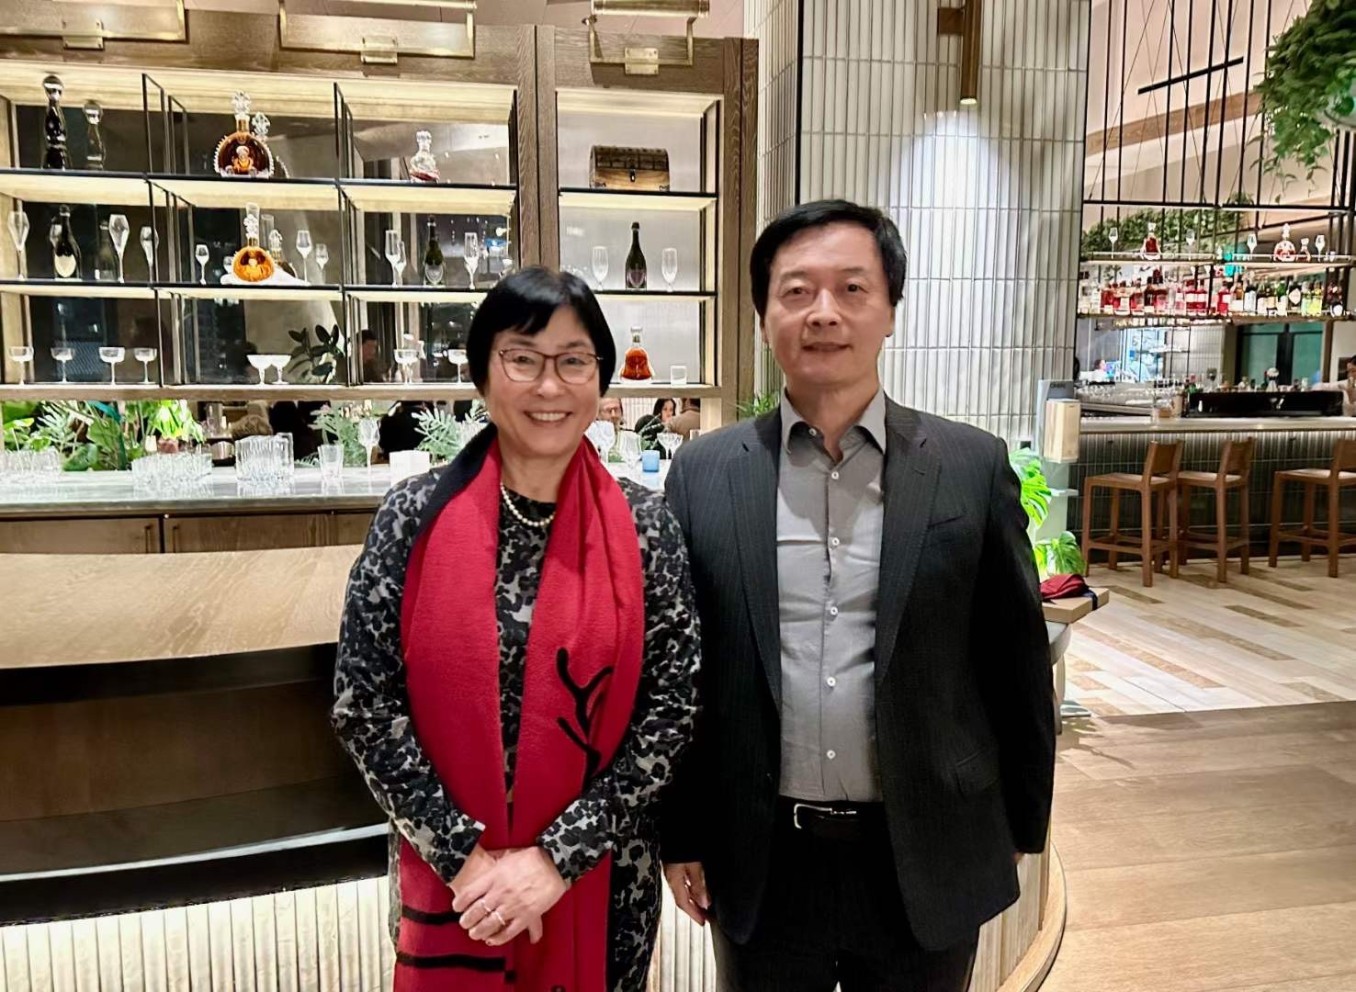 President Qin (right) engages in a dialogue with Prof Zhou Min (left), a member of both the National Academy of Sciences and the American Academy of Arts and Sciences, and a Professor of Sociology and Asian American Studies at the University of California, Los Angeles (UCLA).